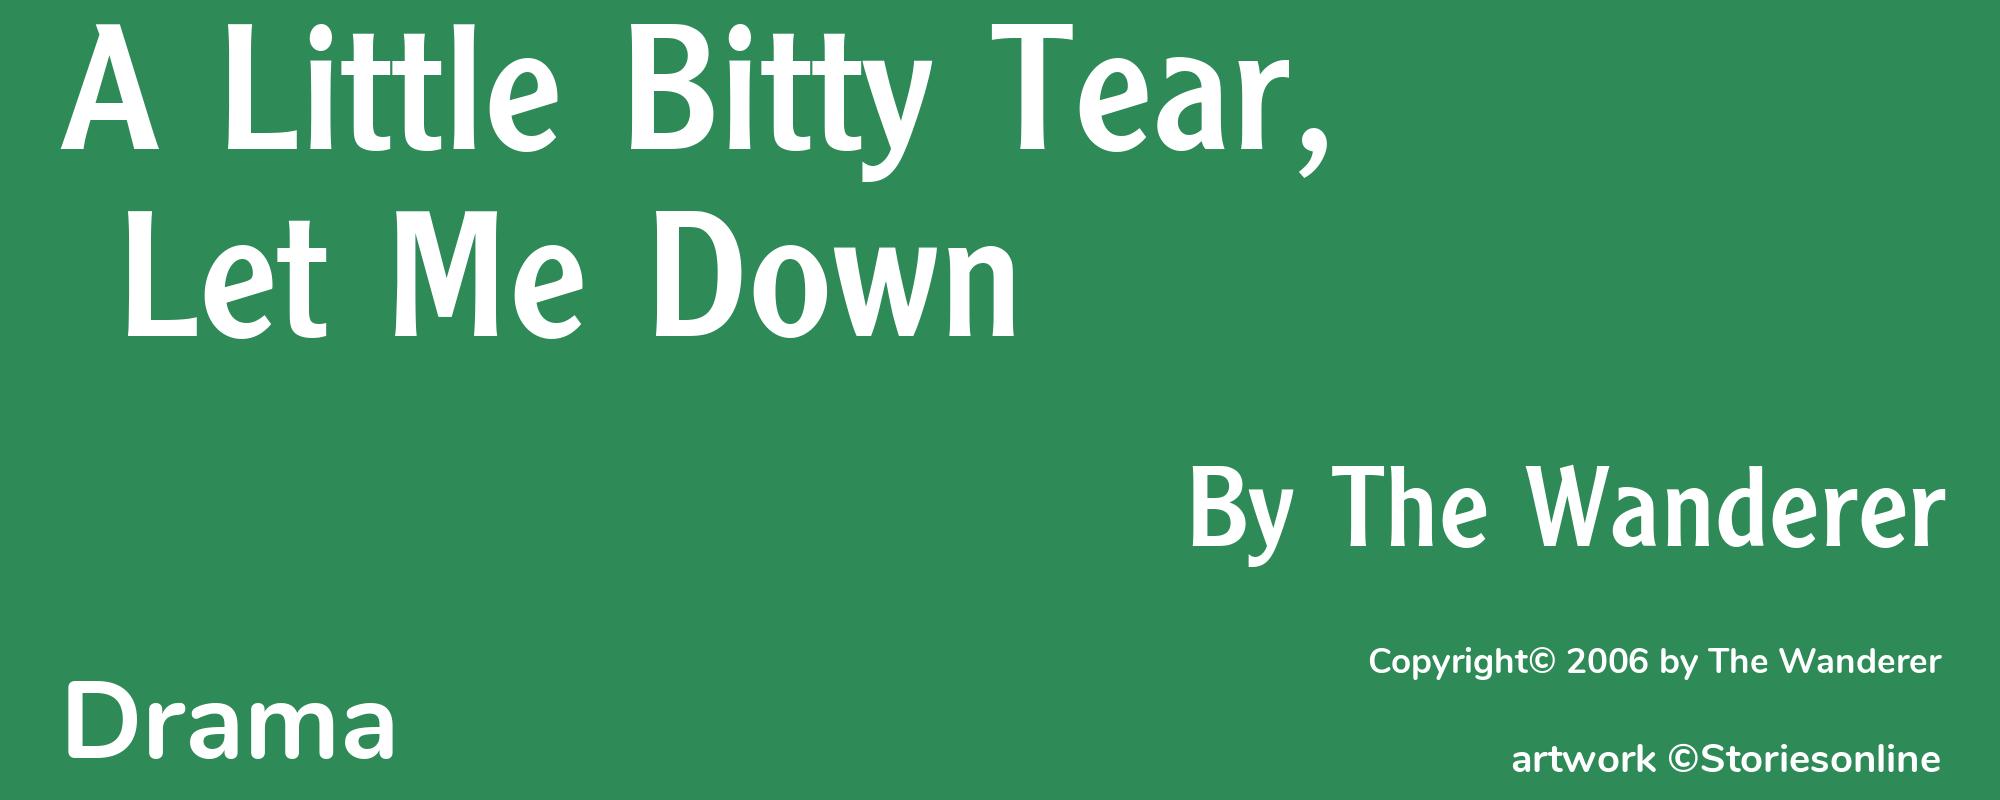 A Little Bitty Tear, Let Me Down - Cover